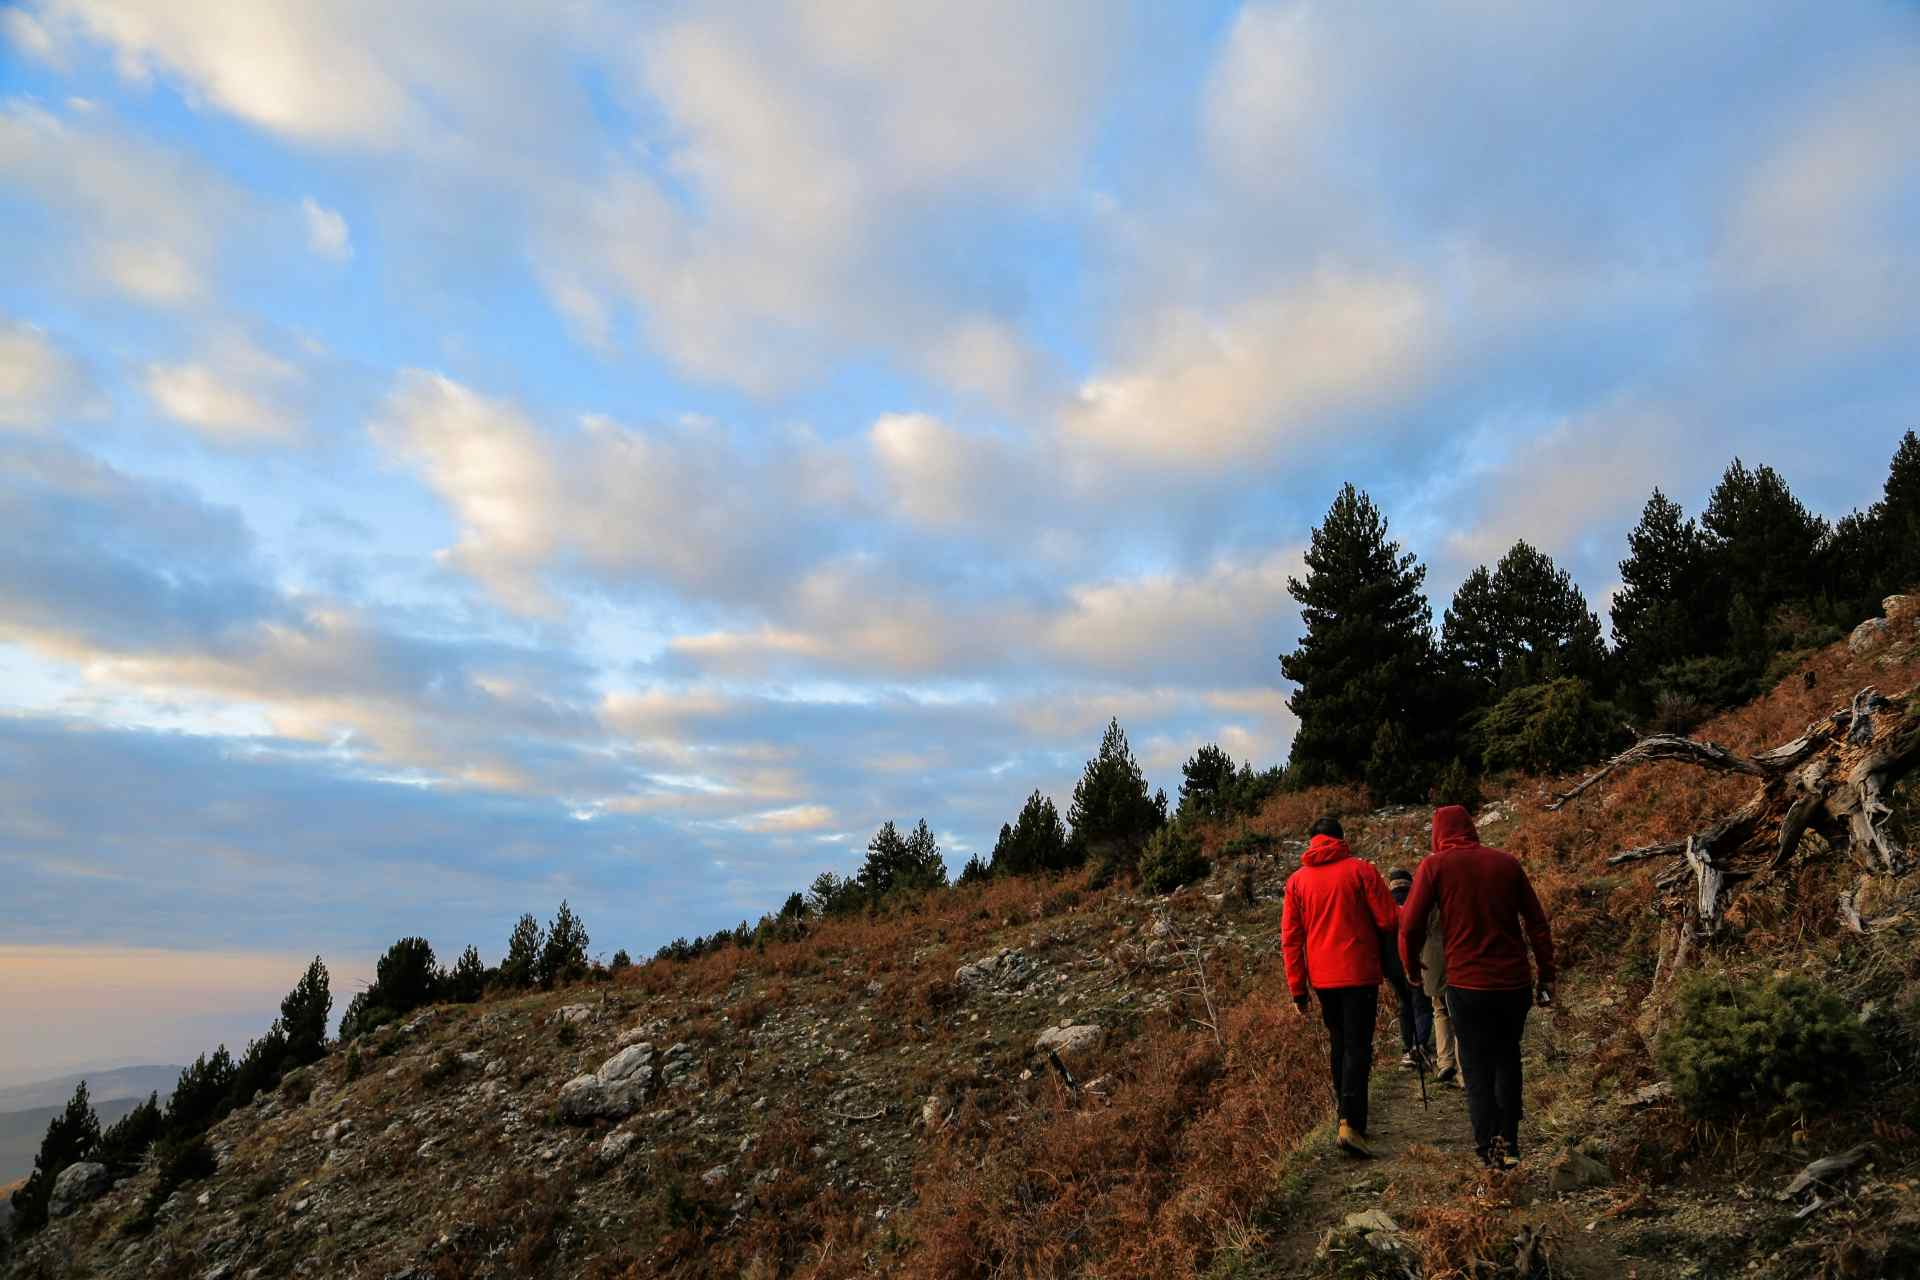 Hiking in the Tomorr Mountains, Albania. Photo: Host/Albania Rafting Group